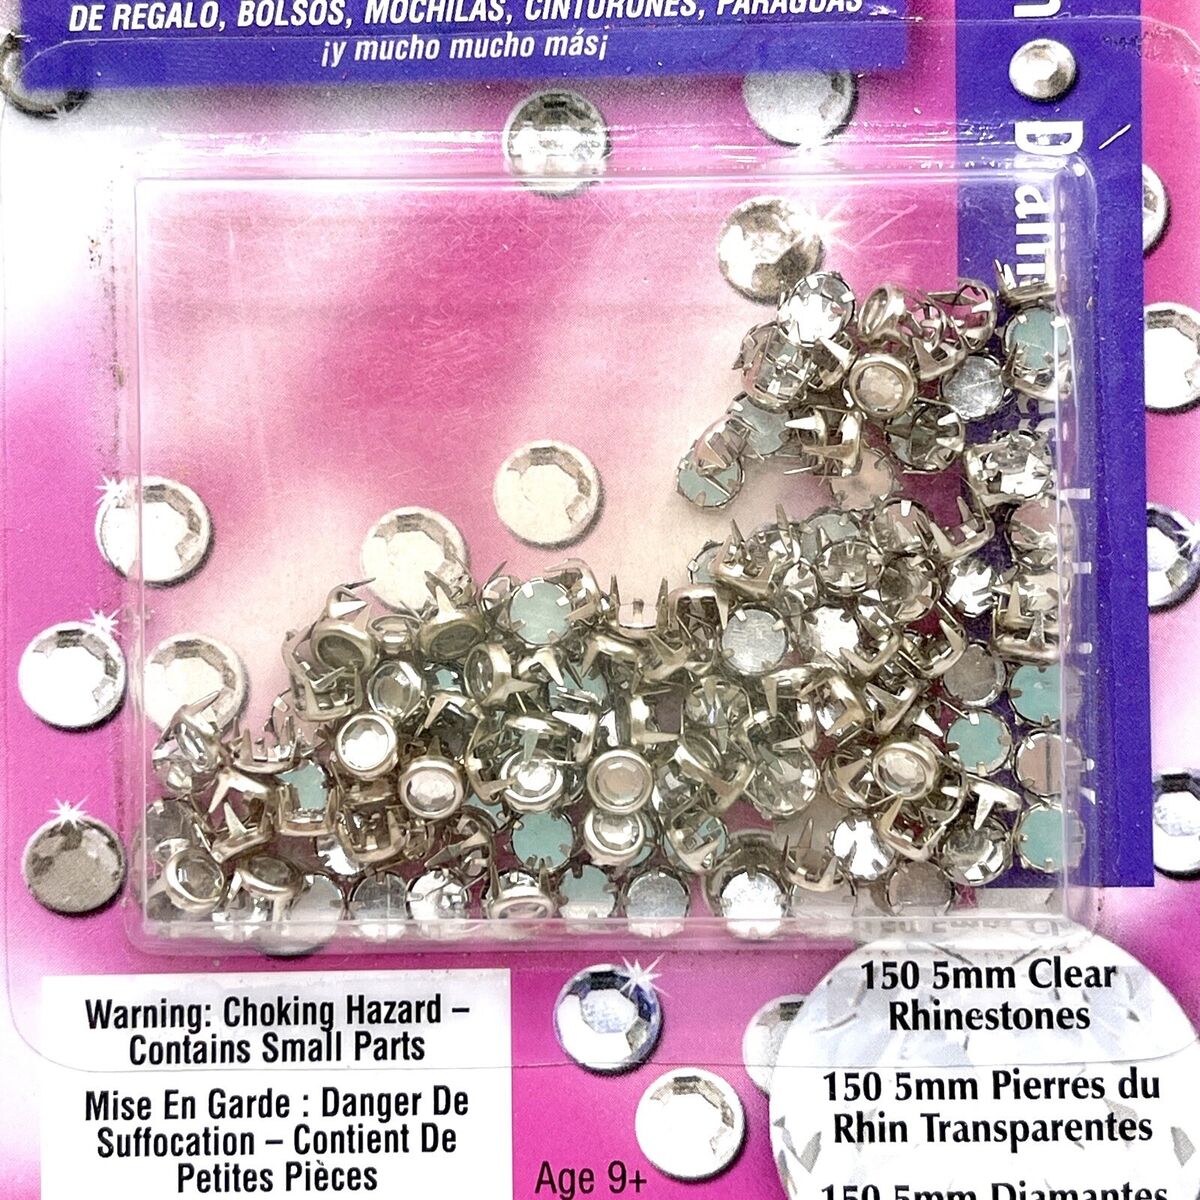 Original Be Dazzler BEDAZZLED WHITE CLEAR RHINESTONES 150 PCS 5mm Beads Gems